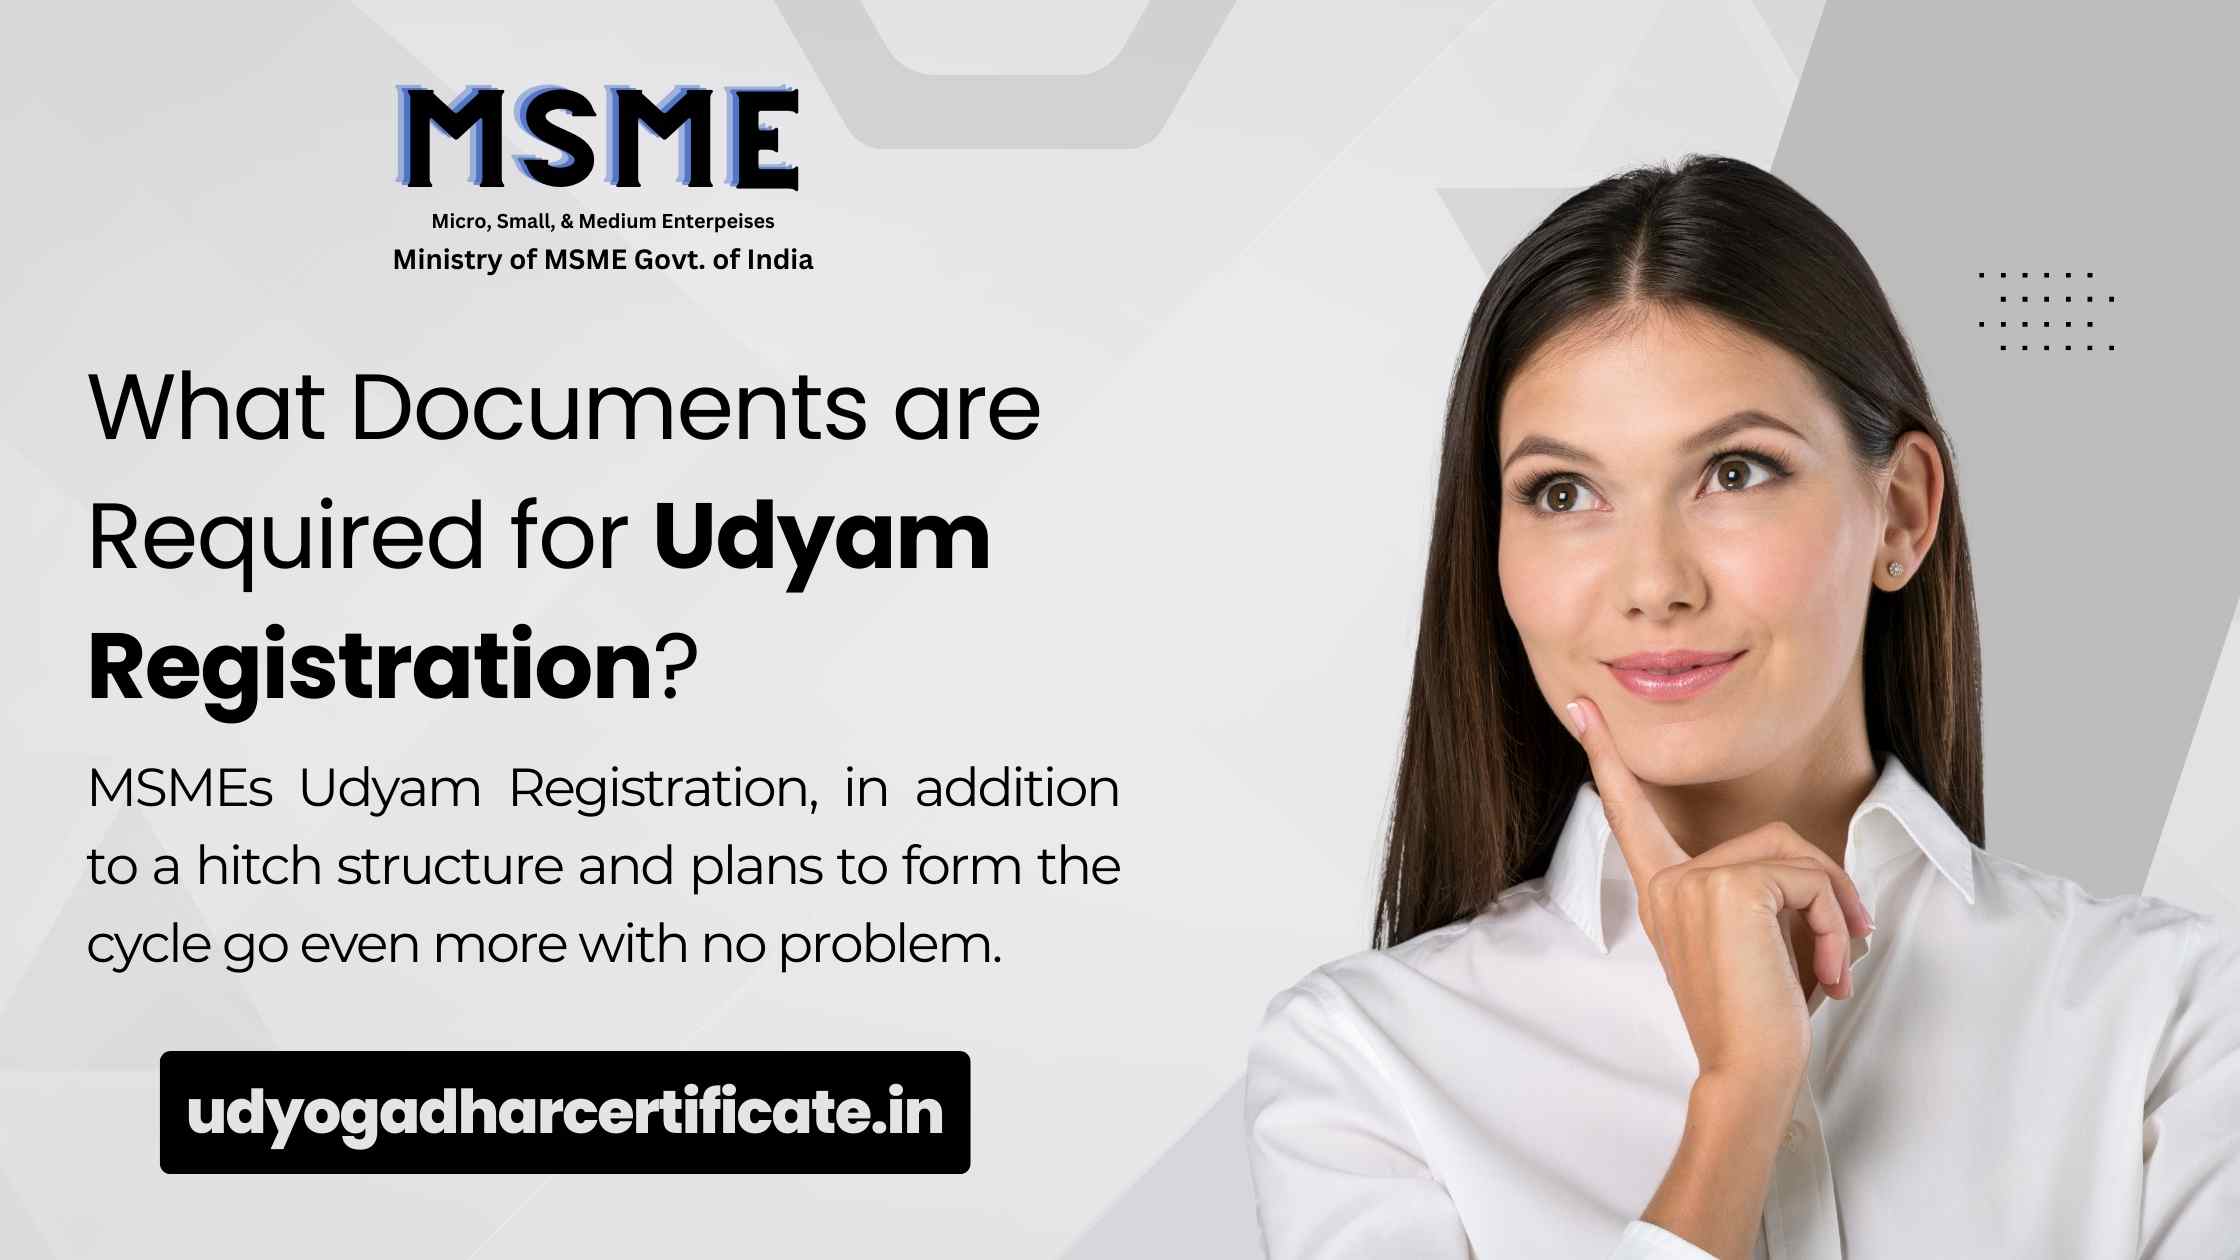 What Documents are Required for Udyam Registration?